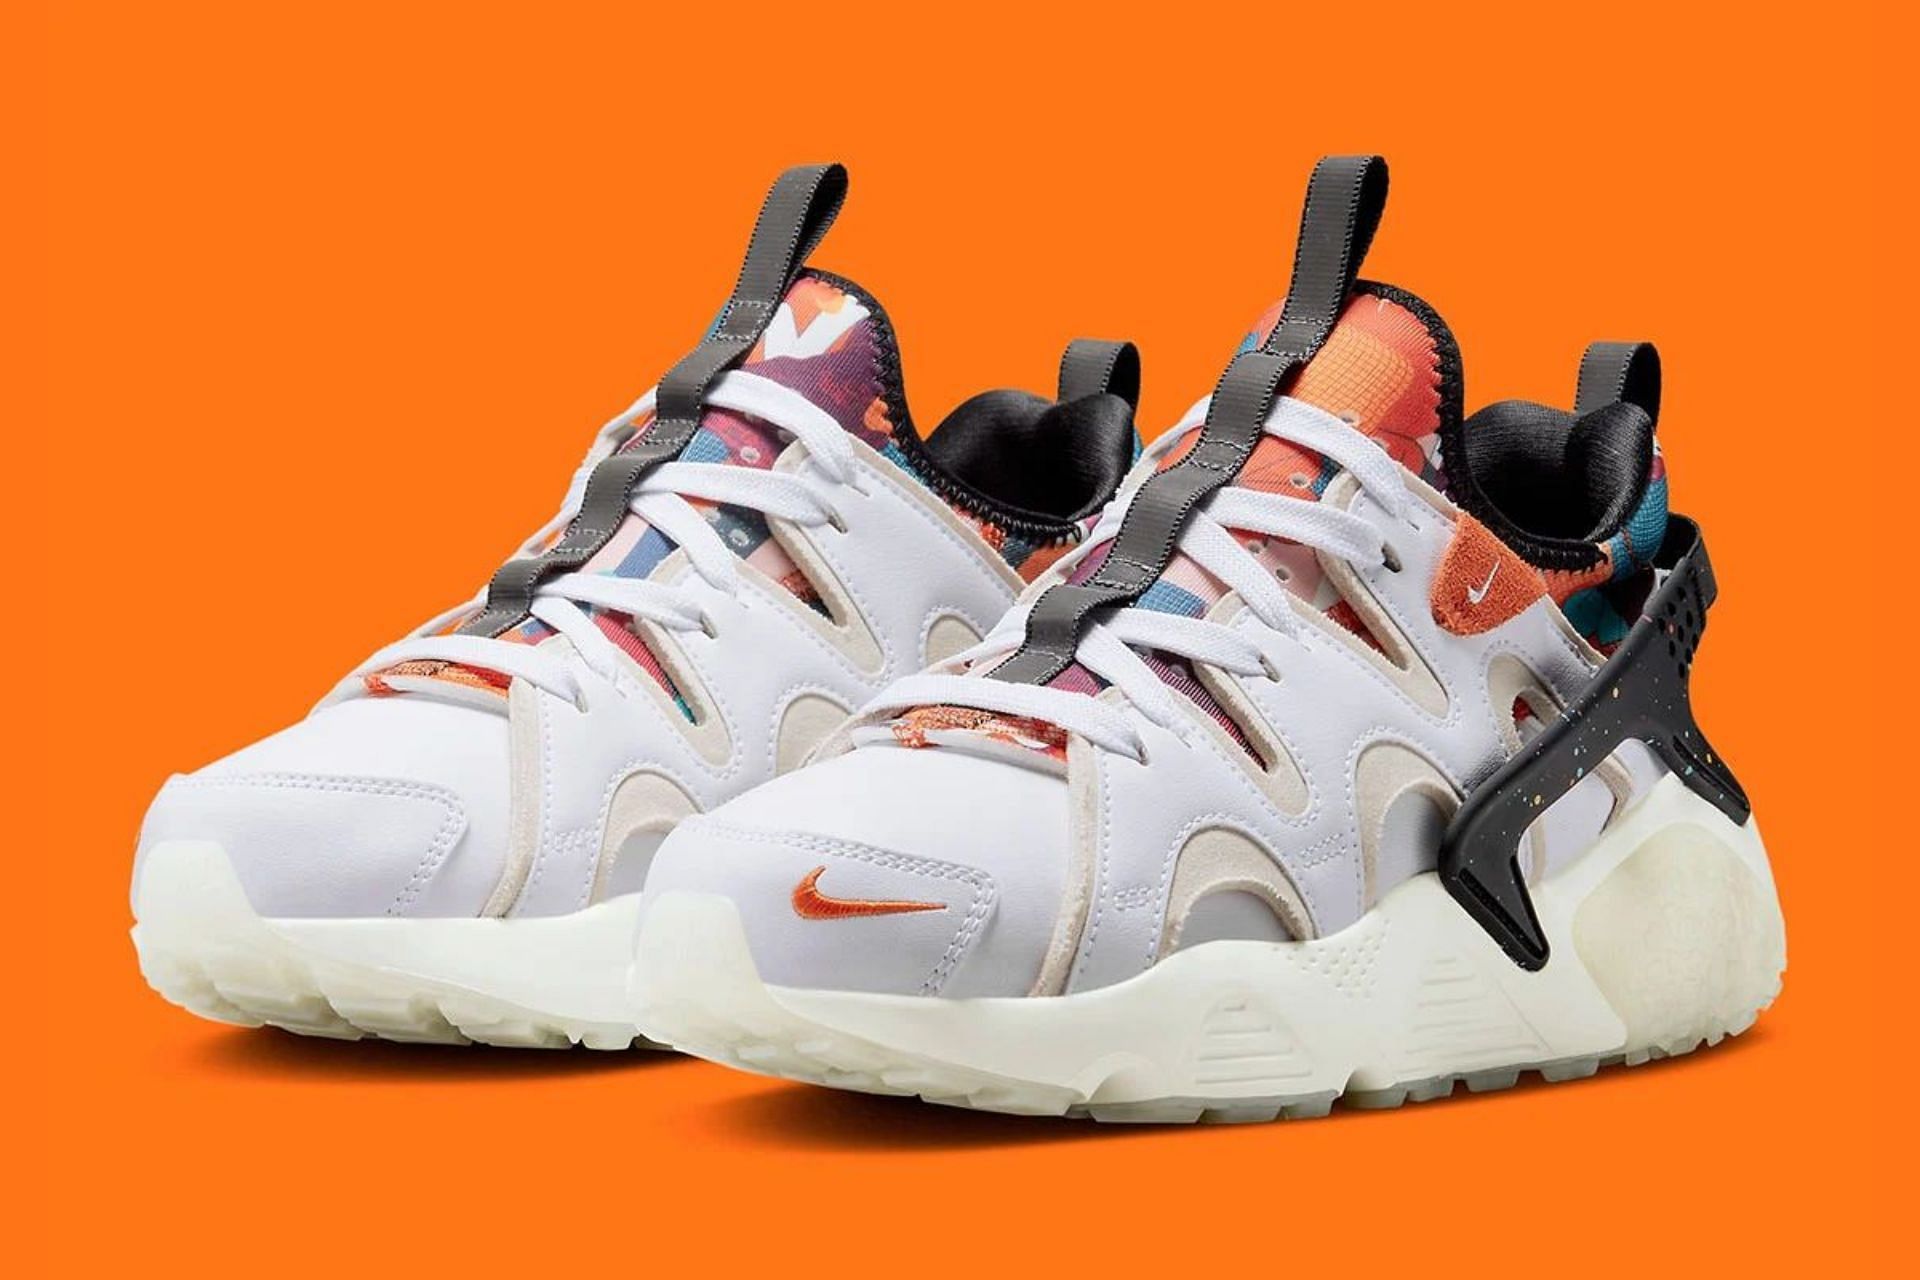 New Year: Where to buy Air Huarache Craft “Lunar New Year” shoes? Everything we know so far